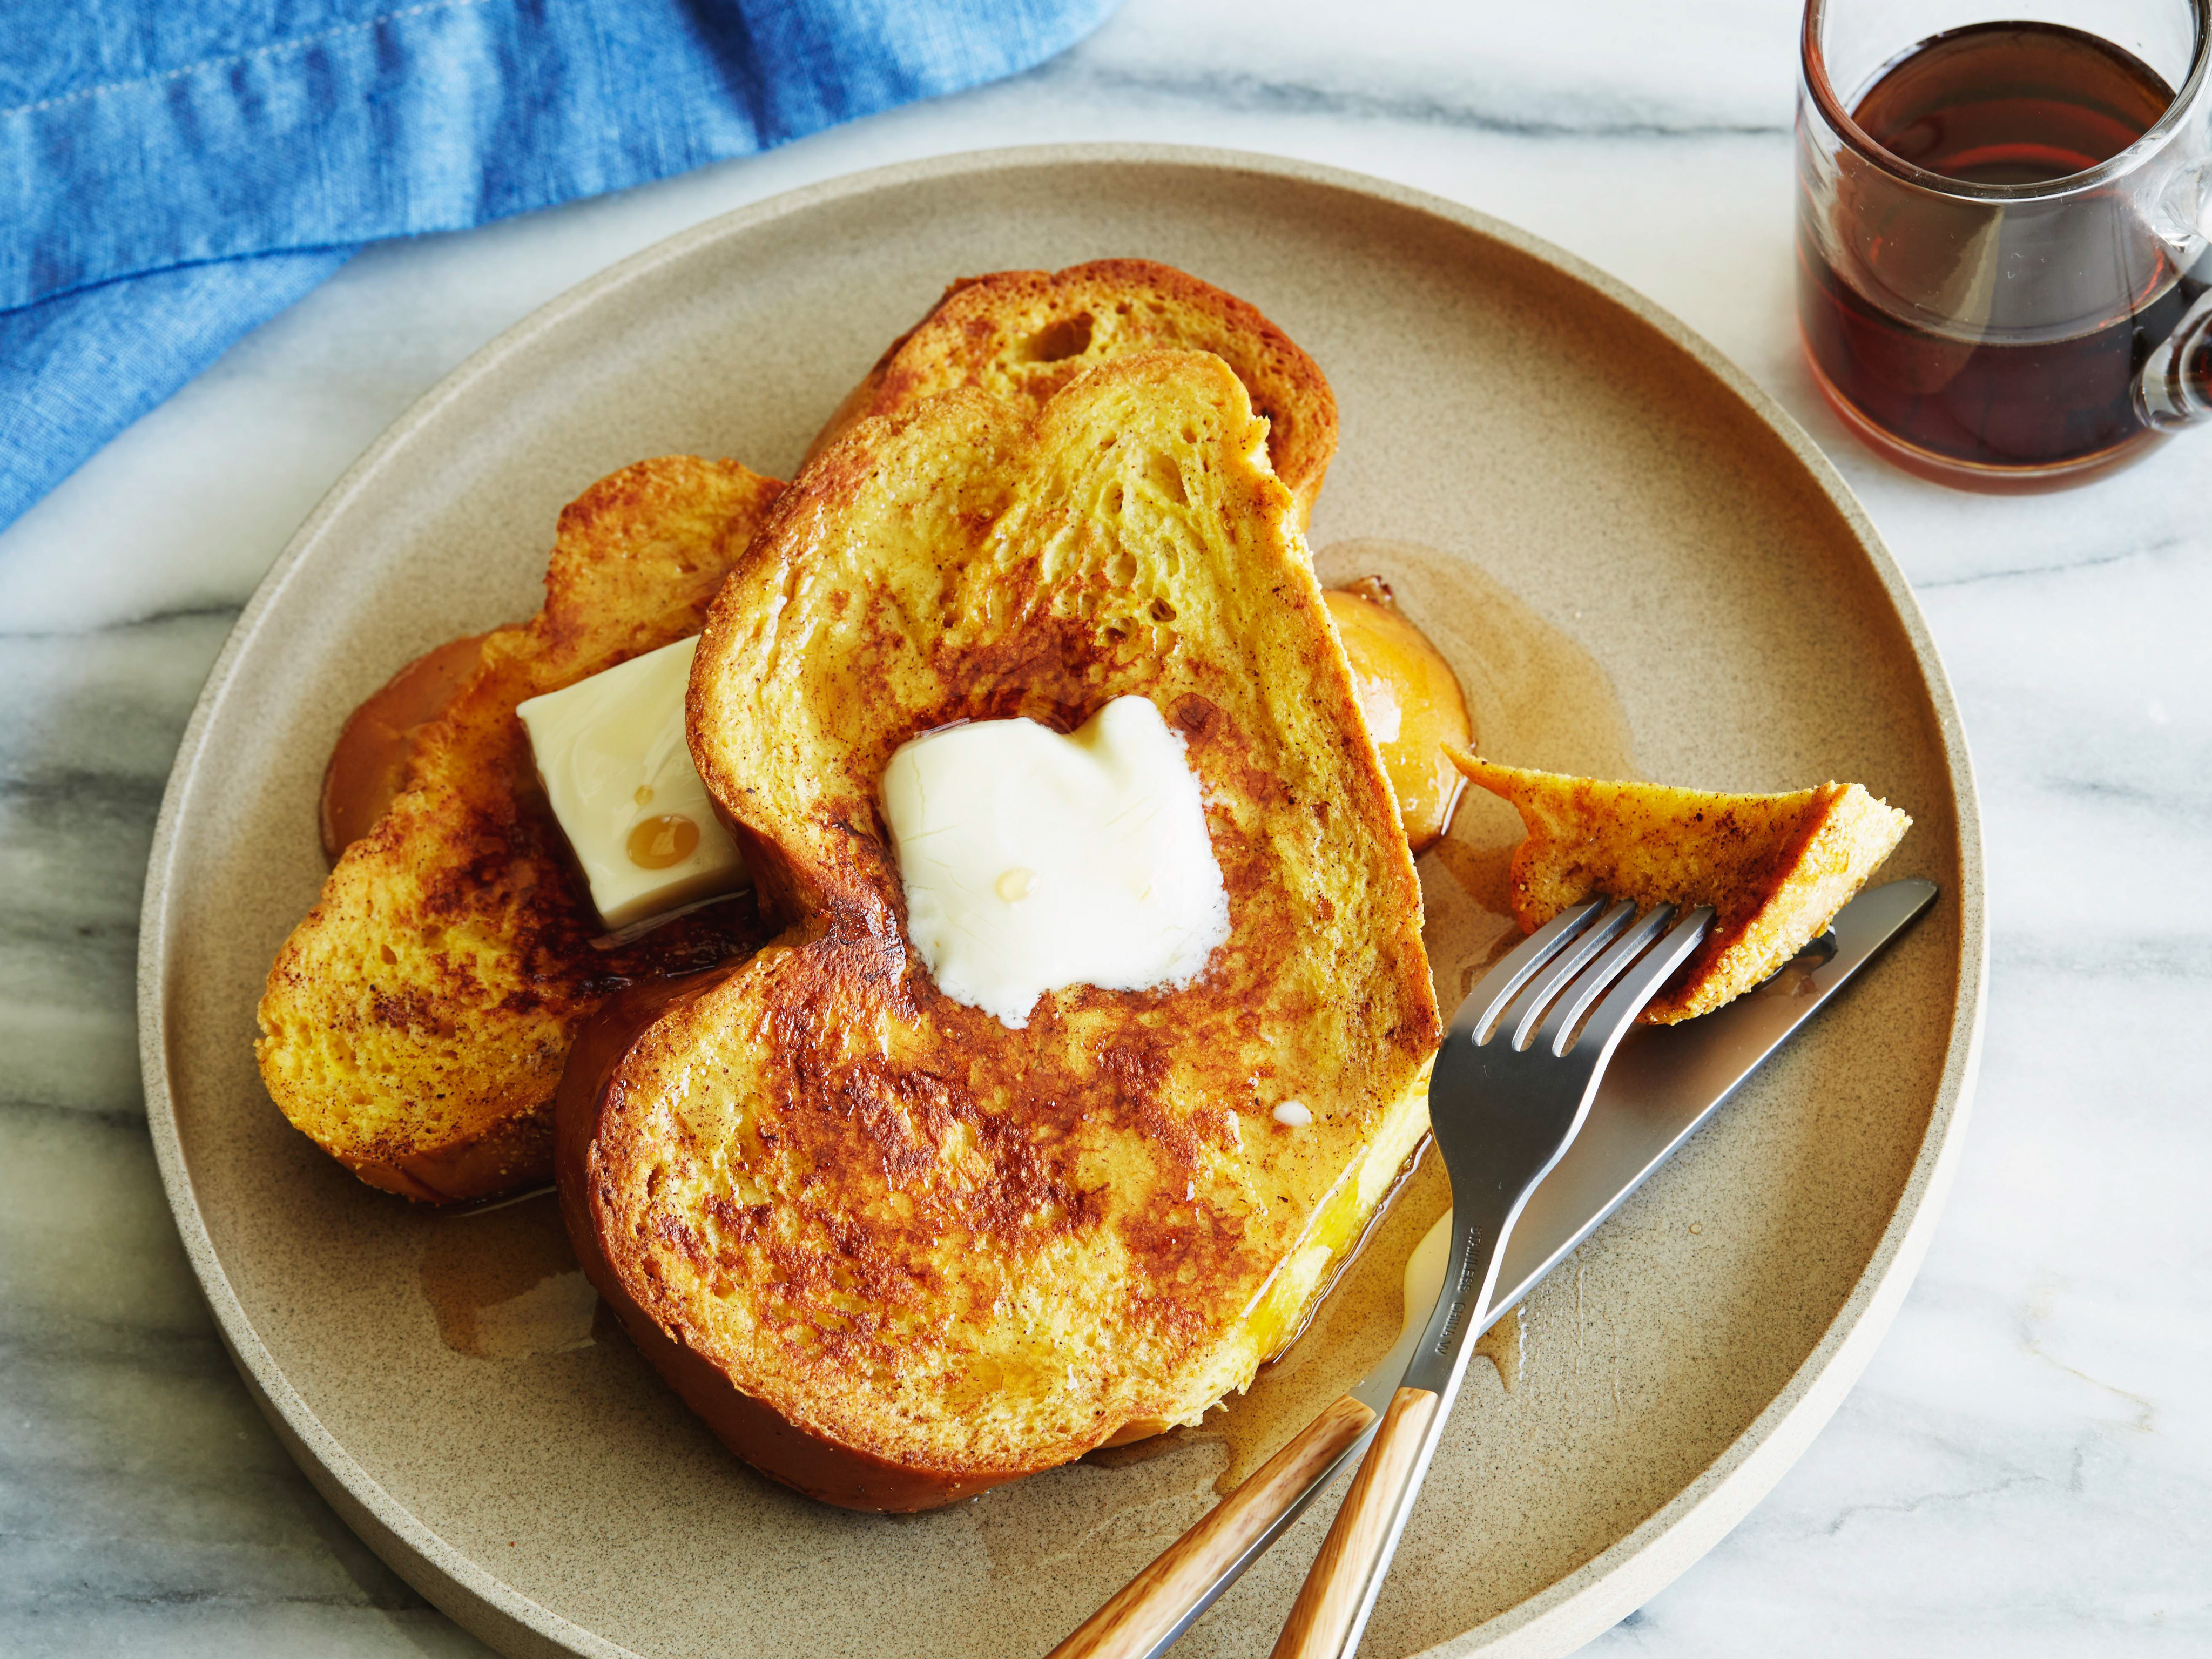 https://www.foodnetwork.com/content/dam/images/food/fullset/2008/3/26/0/IE0309_French-Toast.jpg